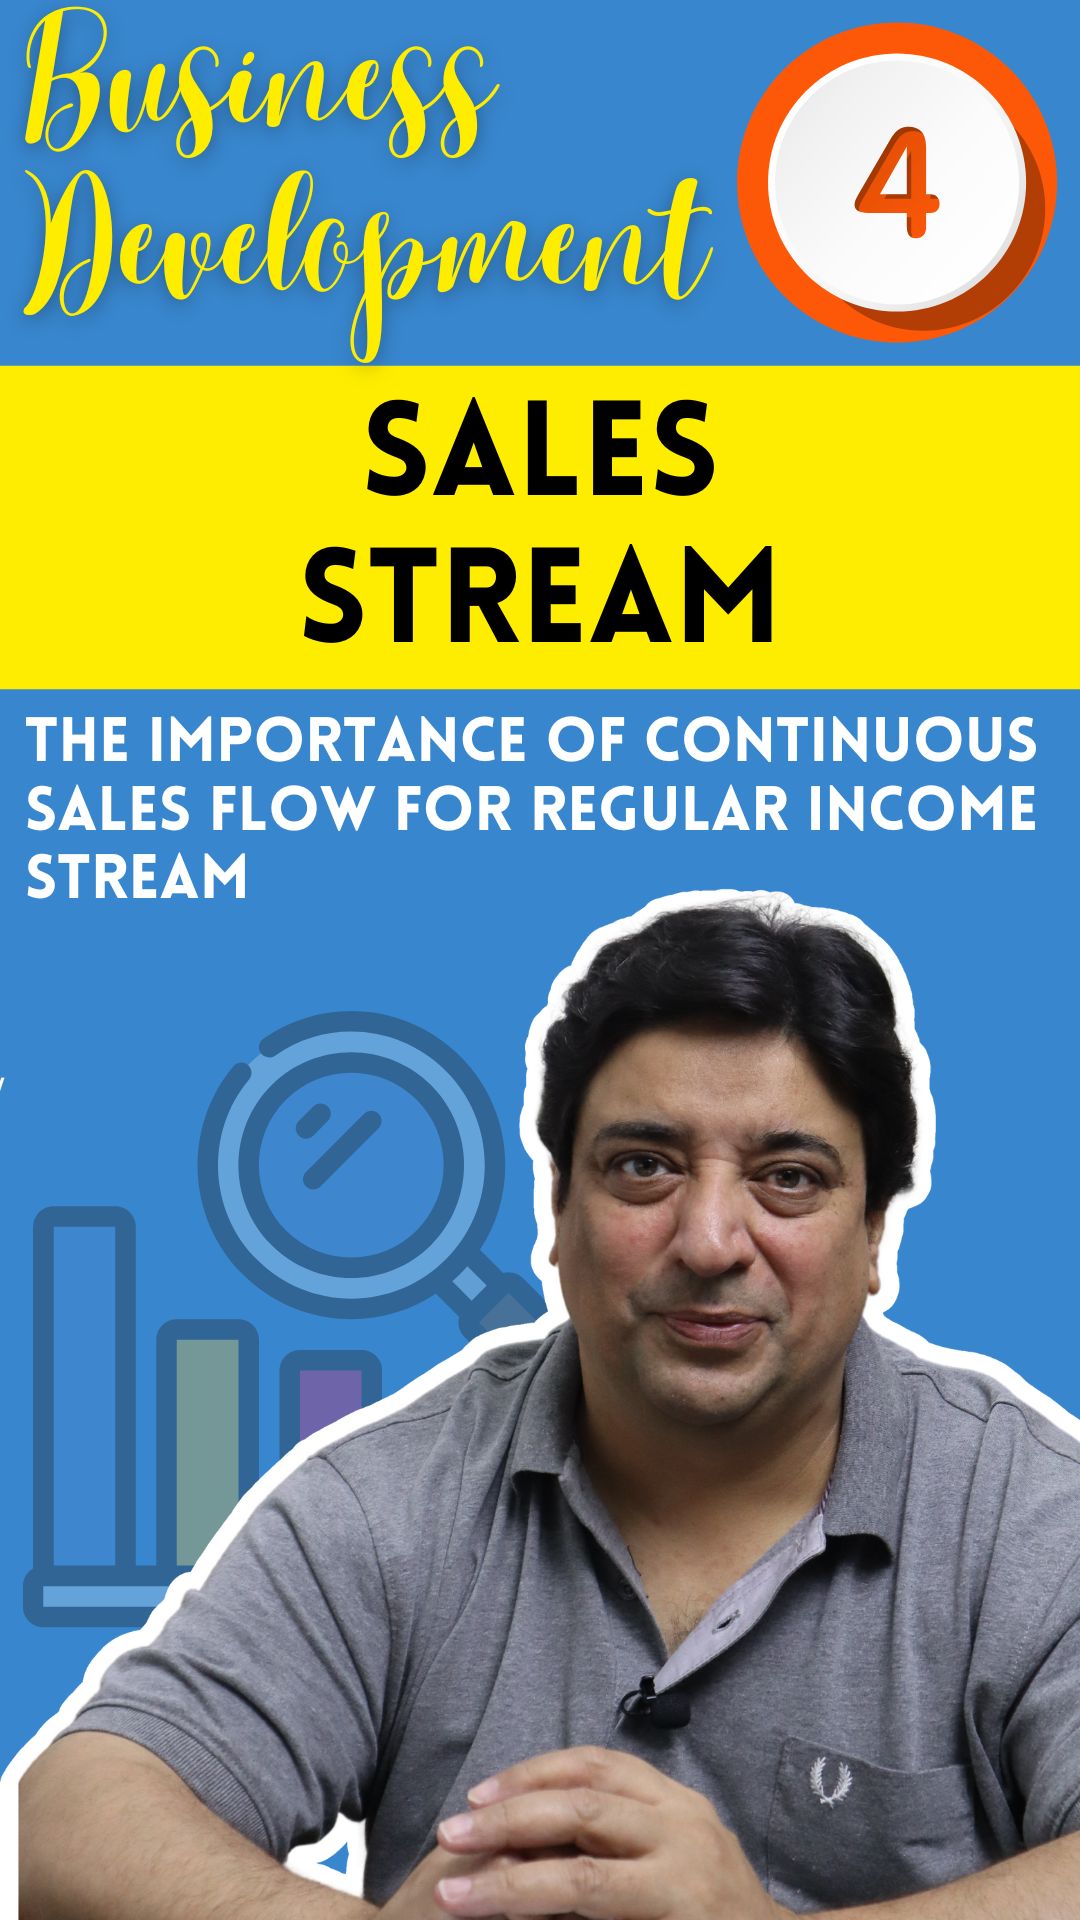 the Power of Continuous Sales Flow for Consistent Income Generation